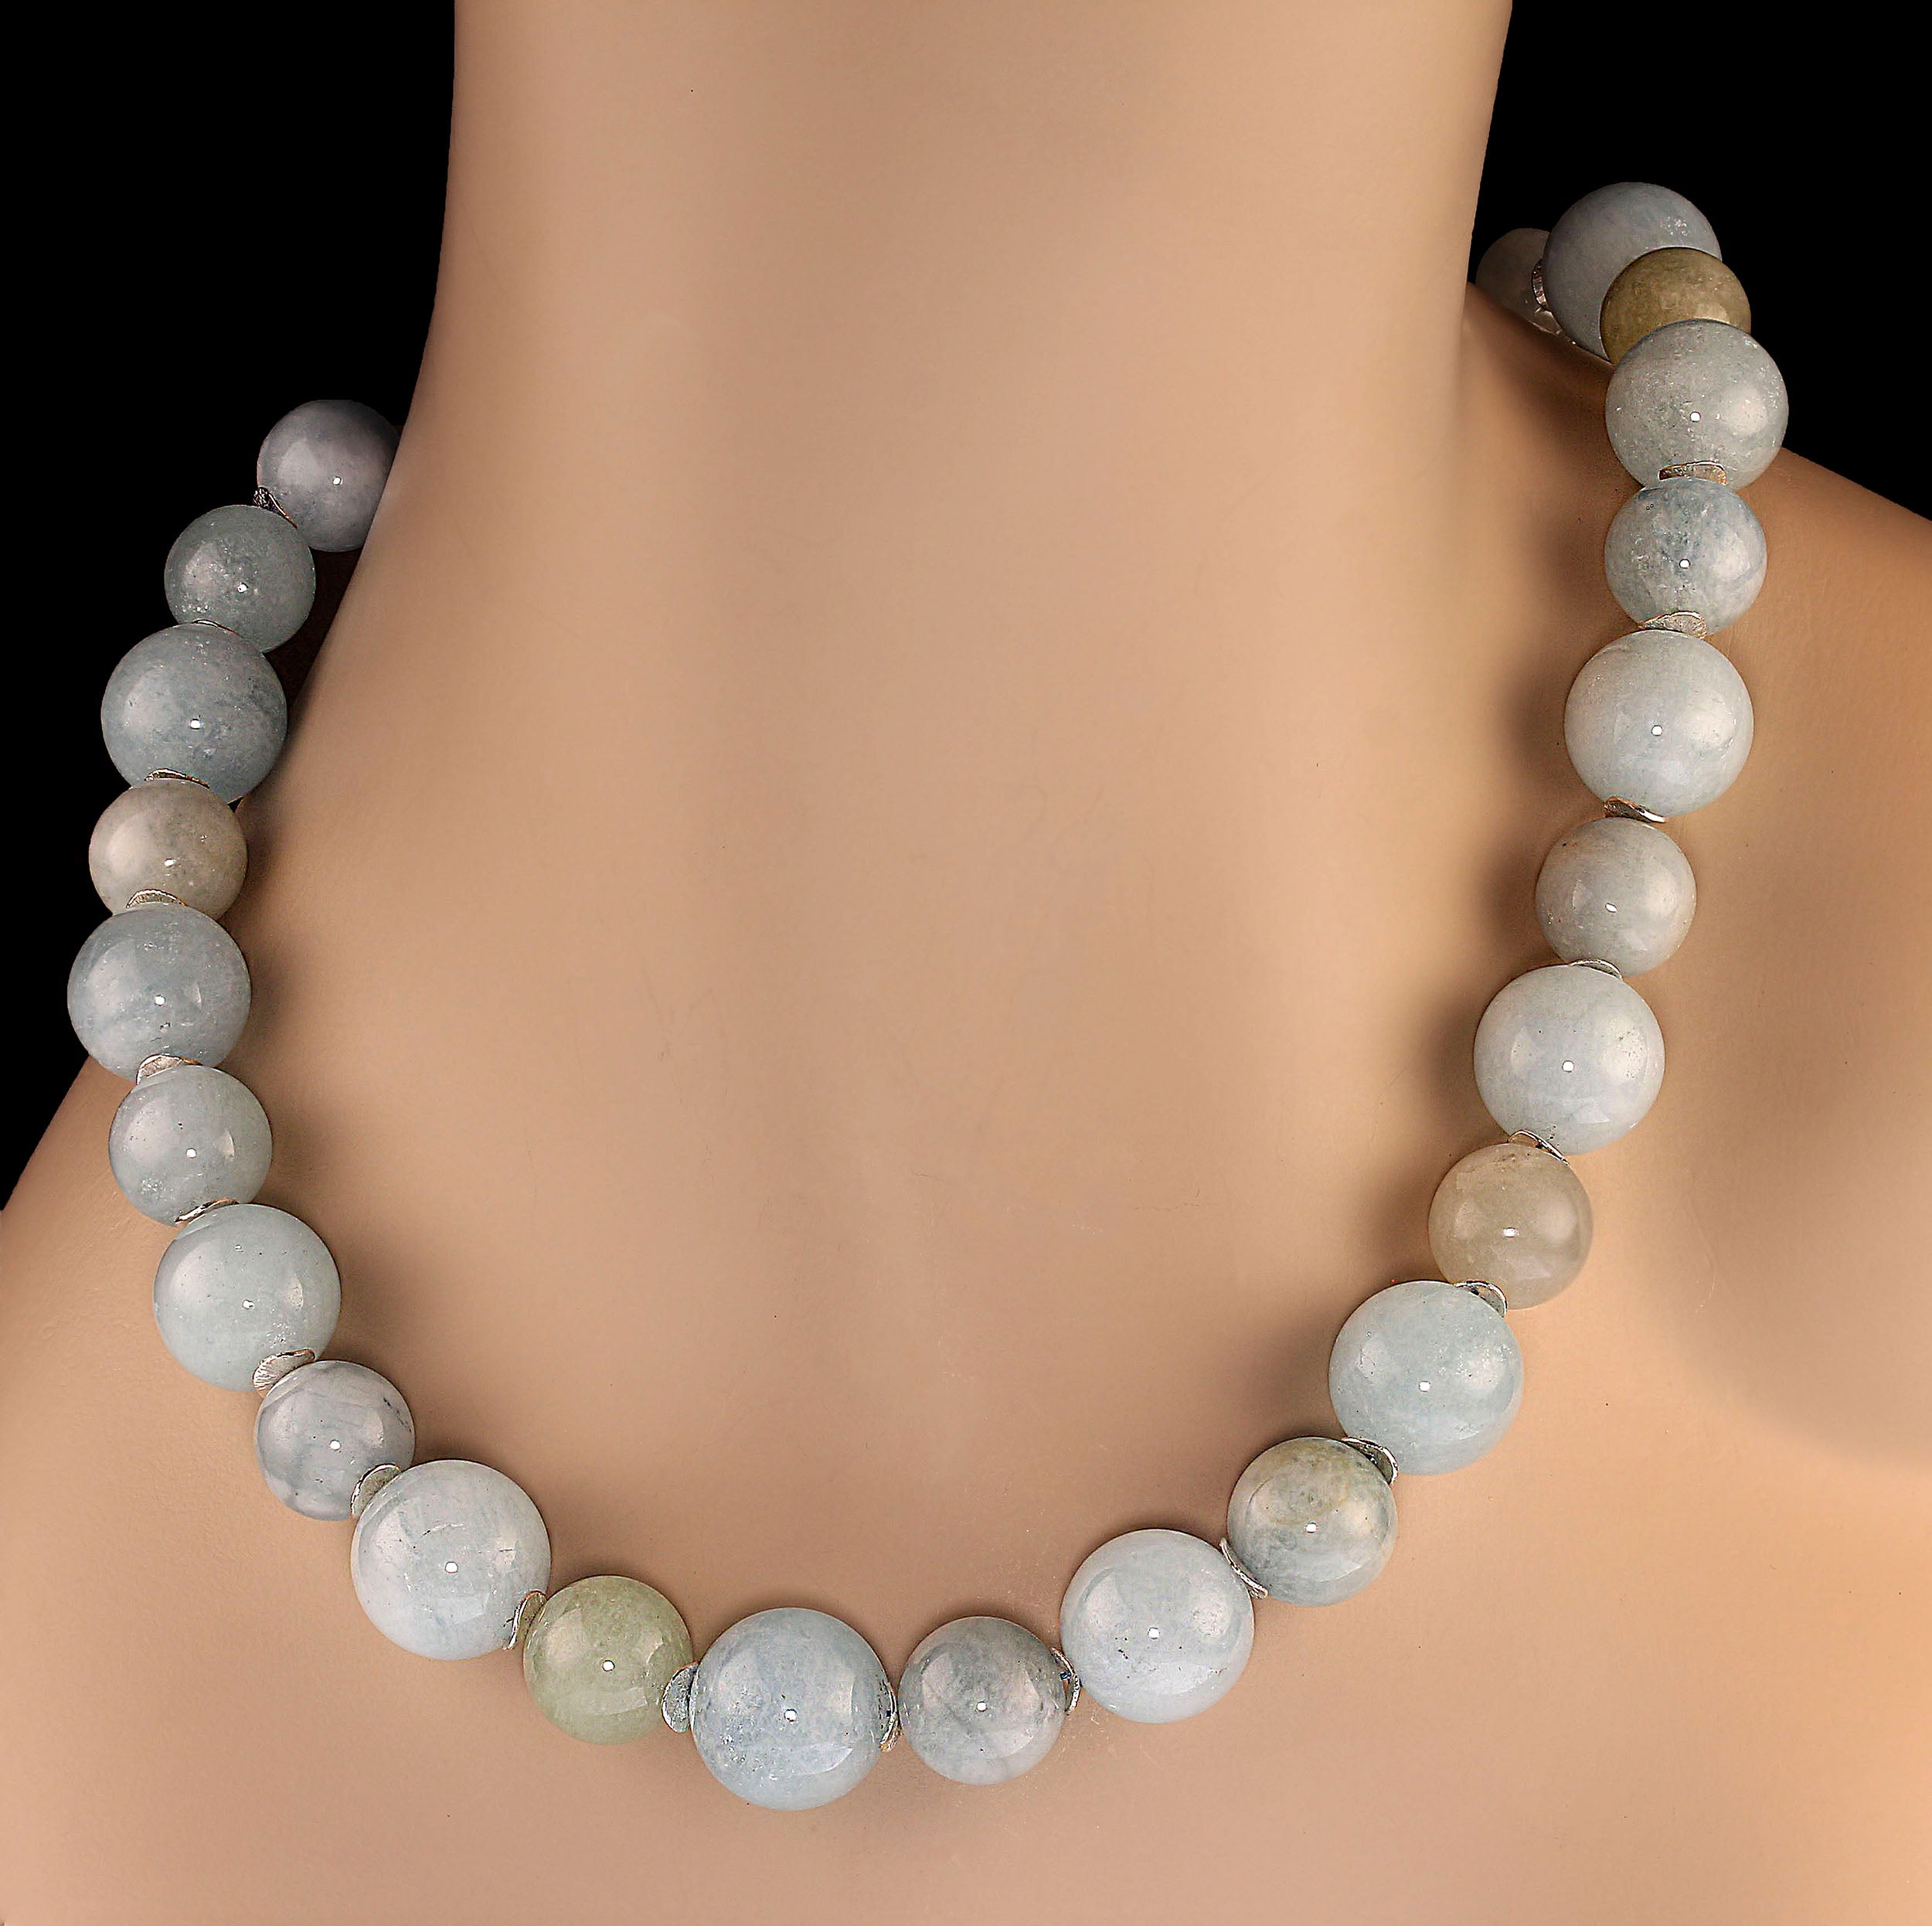 AJD 25 In Magnificent March Birthstone Aquamarine Glowing Translucent Necklace 